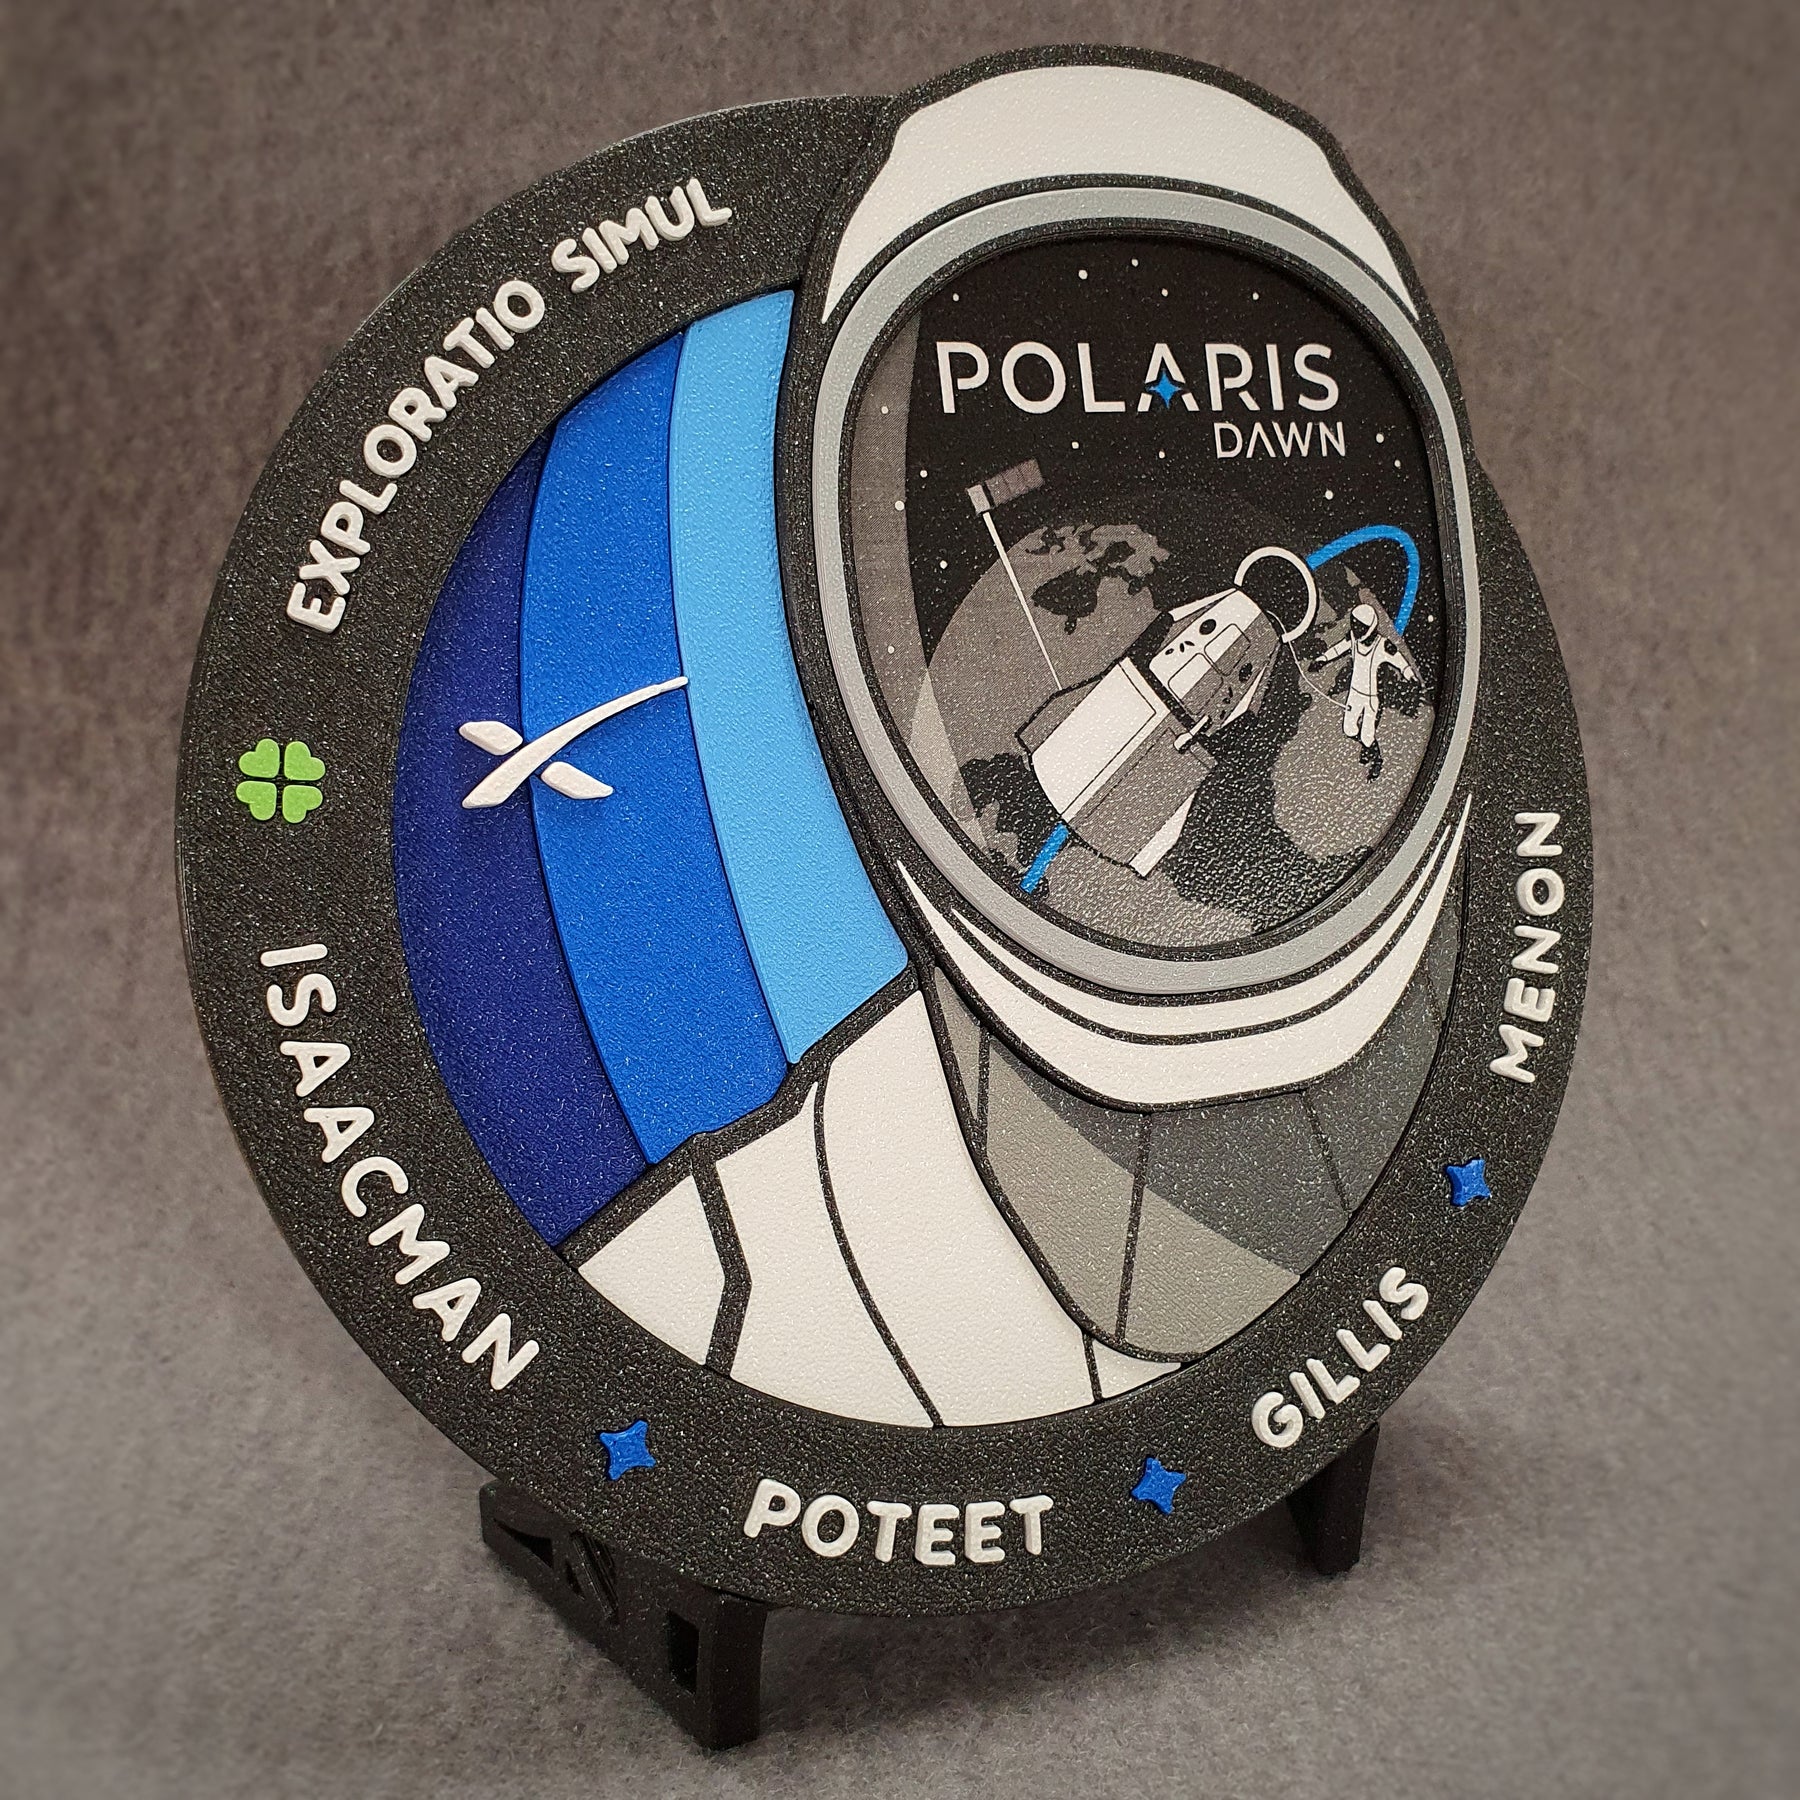 SpaceX - Polaris Mission I Patch